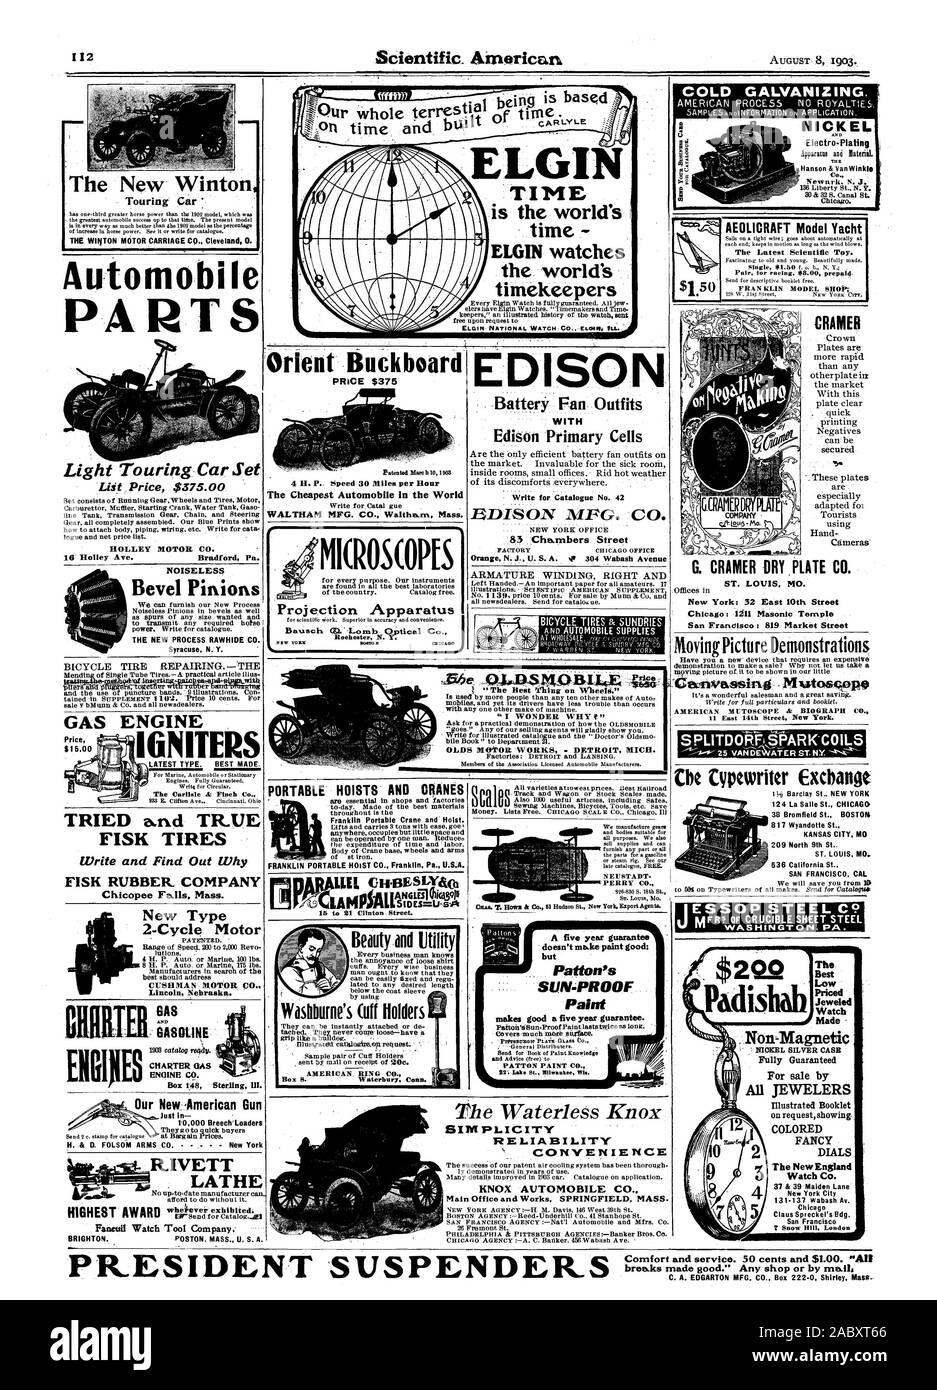 of its discomforts everywhere. EDISON MPG. CO. 83 Cha.rnbers Street ARMATURE WINDING RIGHT AND AND AUTOMOBILE SUPPLIES  OLDS MOTOR WORKS - DETROIT MICH. Sr. Loma Mo. i doesn't make paint good; but Patton's SIIN-PROOF Paint makes good a five year guarantee. PIITSHOIMIT 'PLATS GLASS 00 RELIABILITY CONVENIENCE KNOX AUTOMOBILE C Main Office and Works SPRINGFIELD MASS. PRESIDENT SUSPENDERS breaks made good.' Any shop or by mail., scientific american, 1903-08-08 Stock Photo